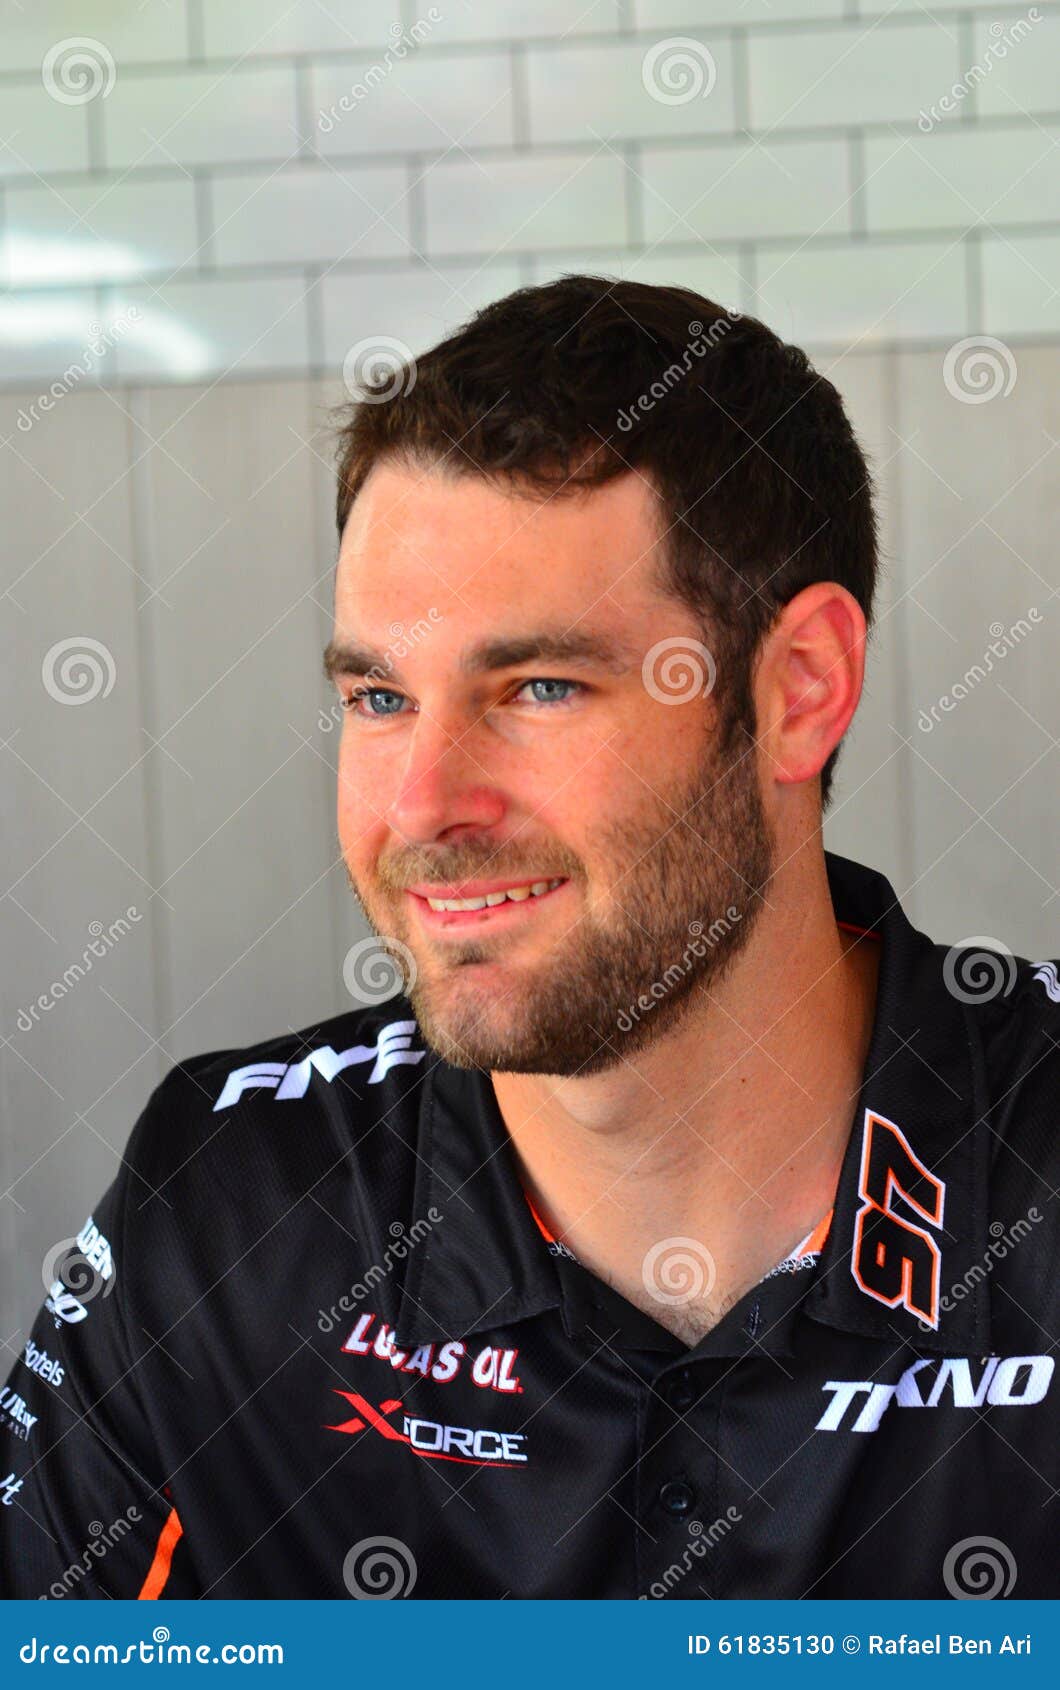 V8 Supercars champion drivers meet Motorsport fans in Auckland,. AUCKLAND - NOV 05 2015:V8 Supercars champion driver Shane Van Gisbergen meet Motorsport fans in Auckland, New Zealand.